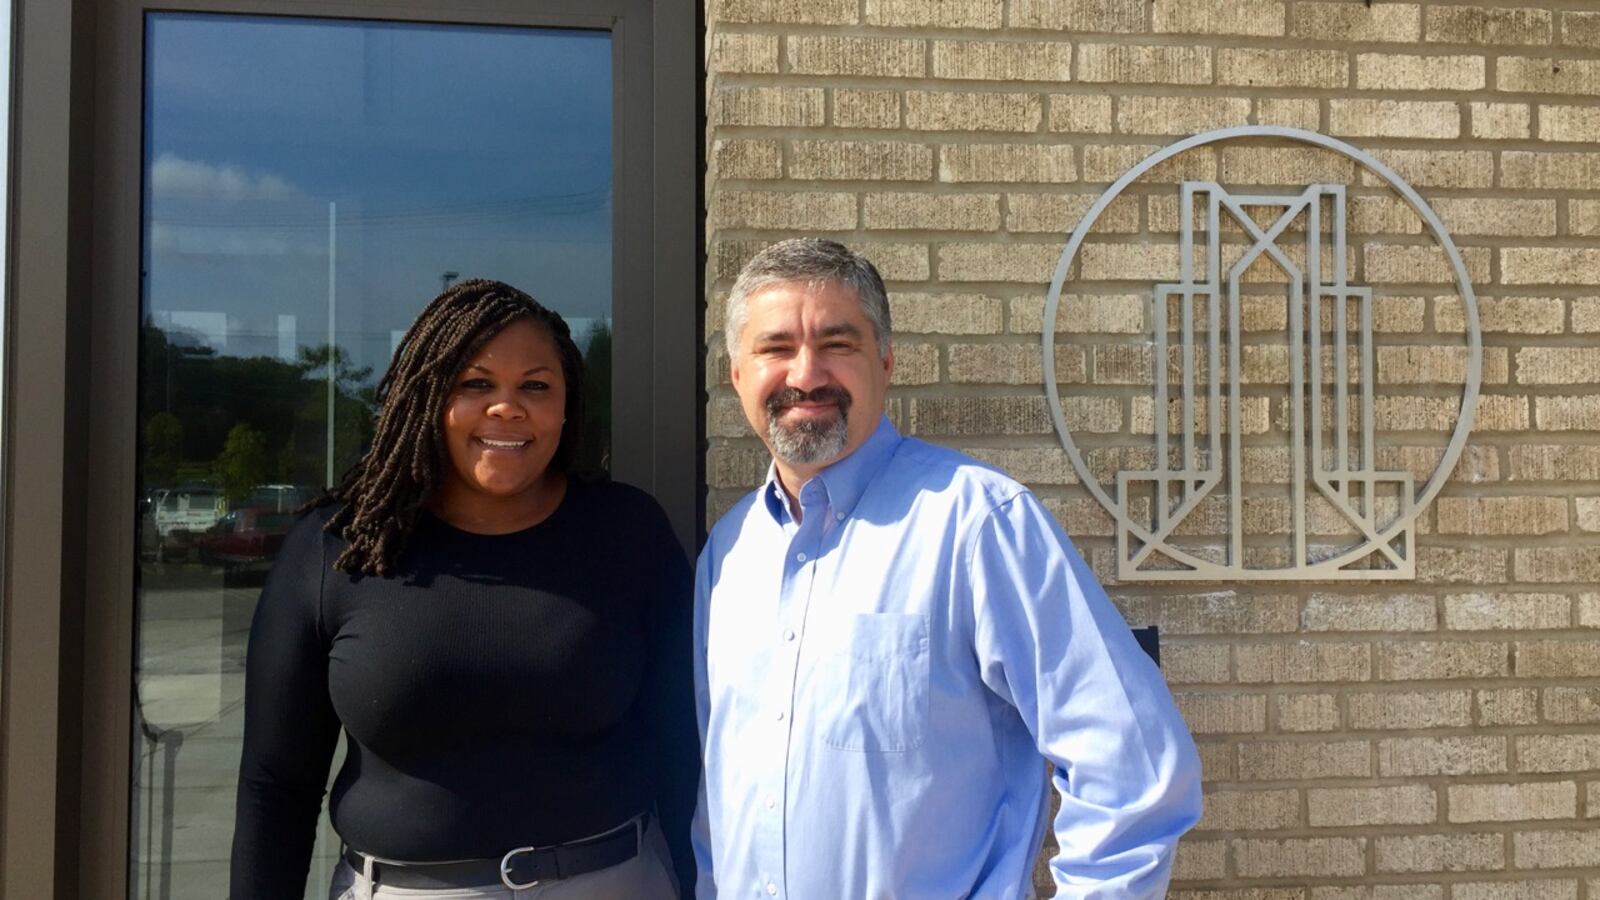 Newly named leaders Chandra Sledge Mathias and Chris Terrill are working to launch Crosstown High School, a charter school that will open in the fall of 2018 in midtown Memphis.